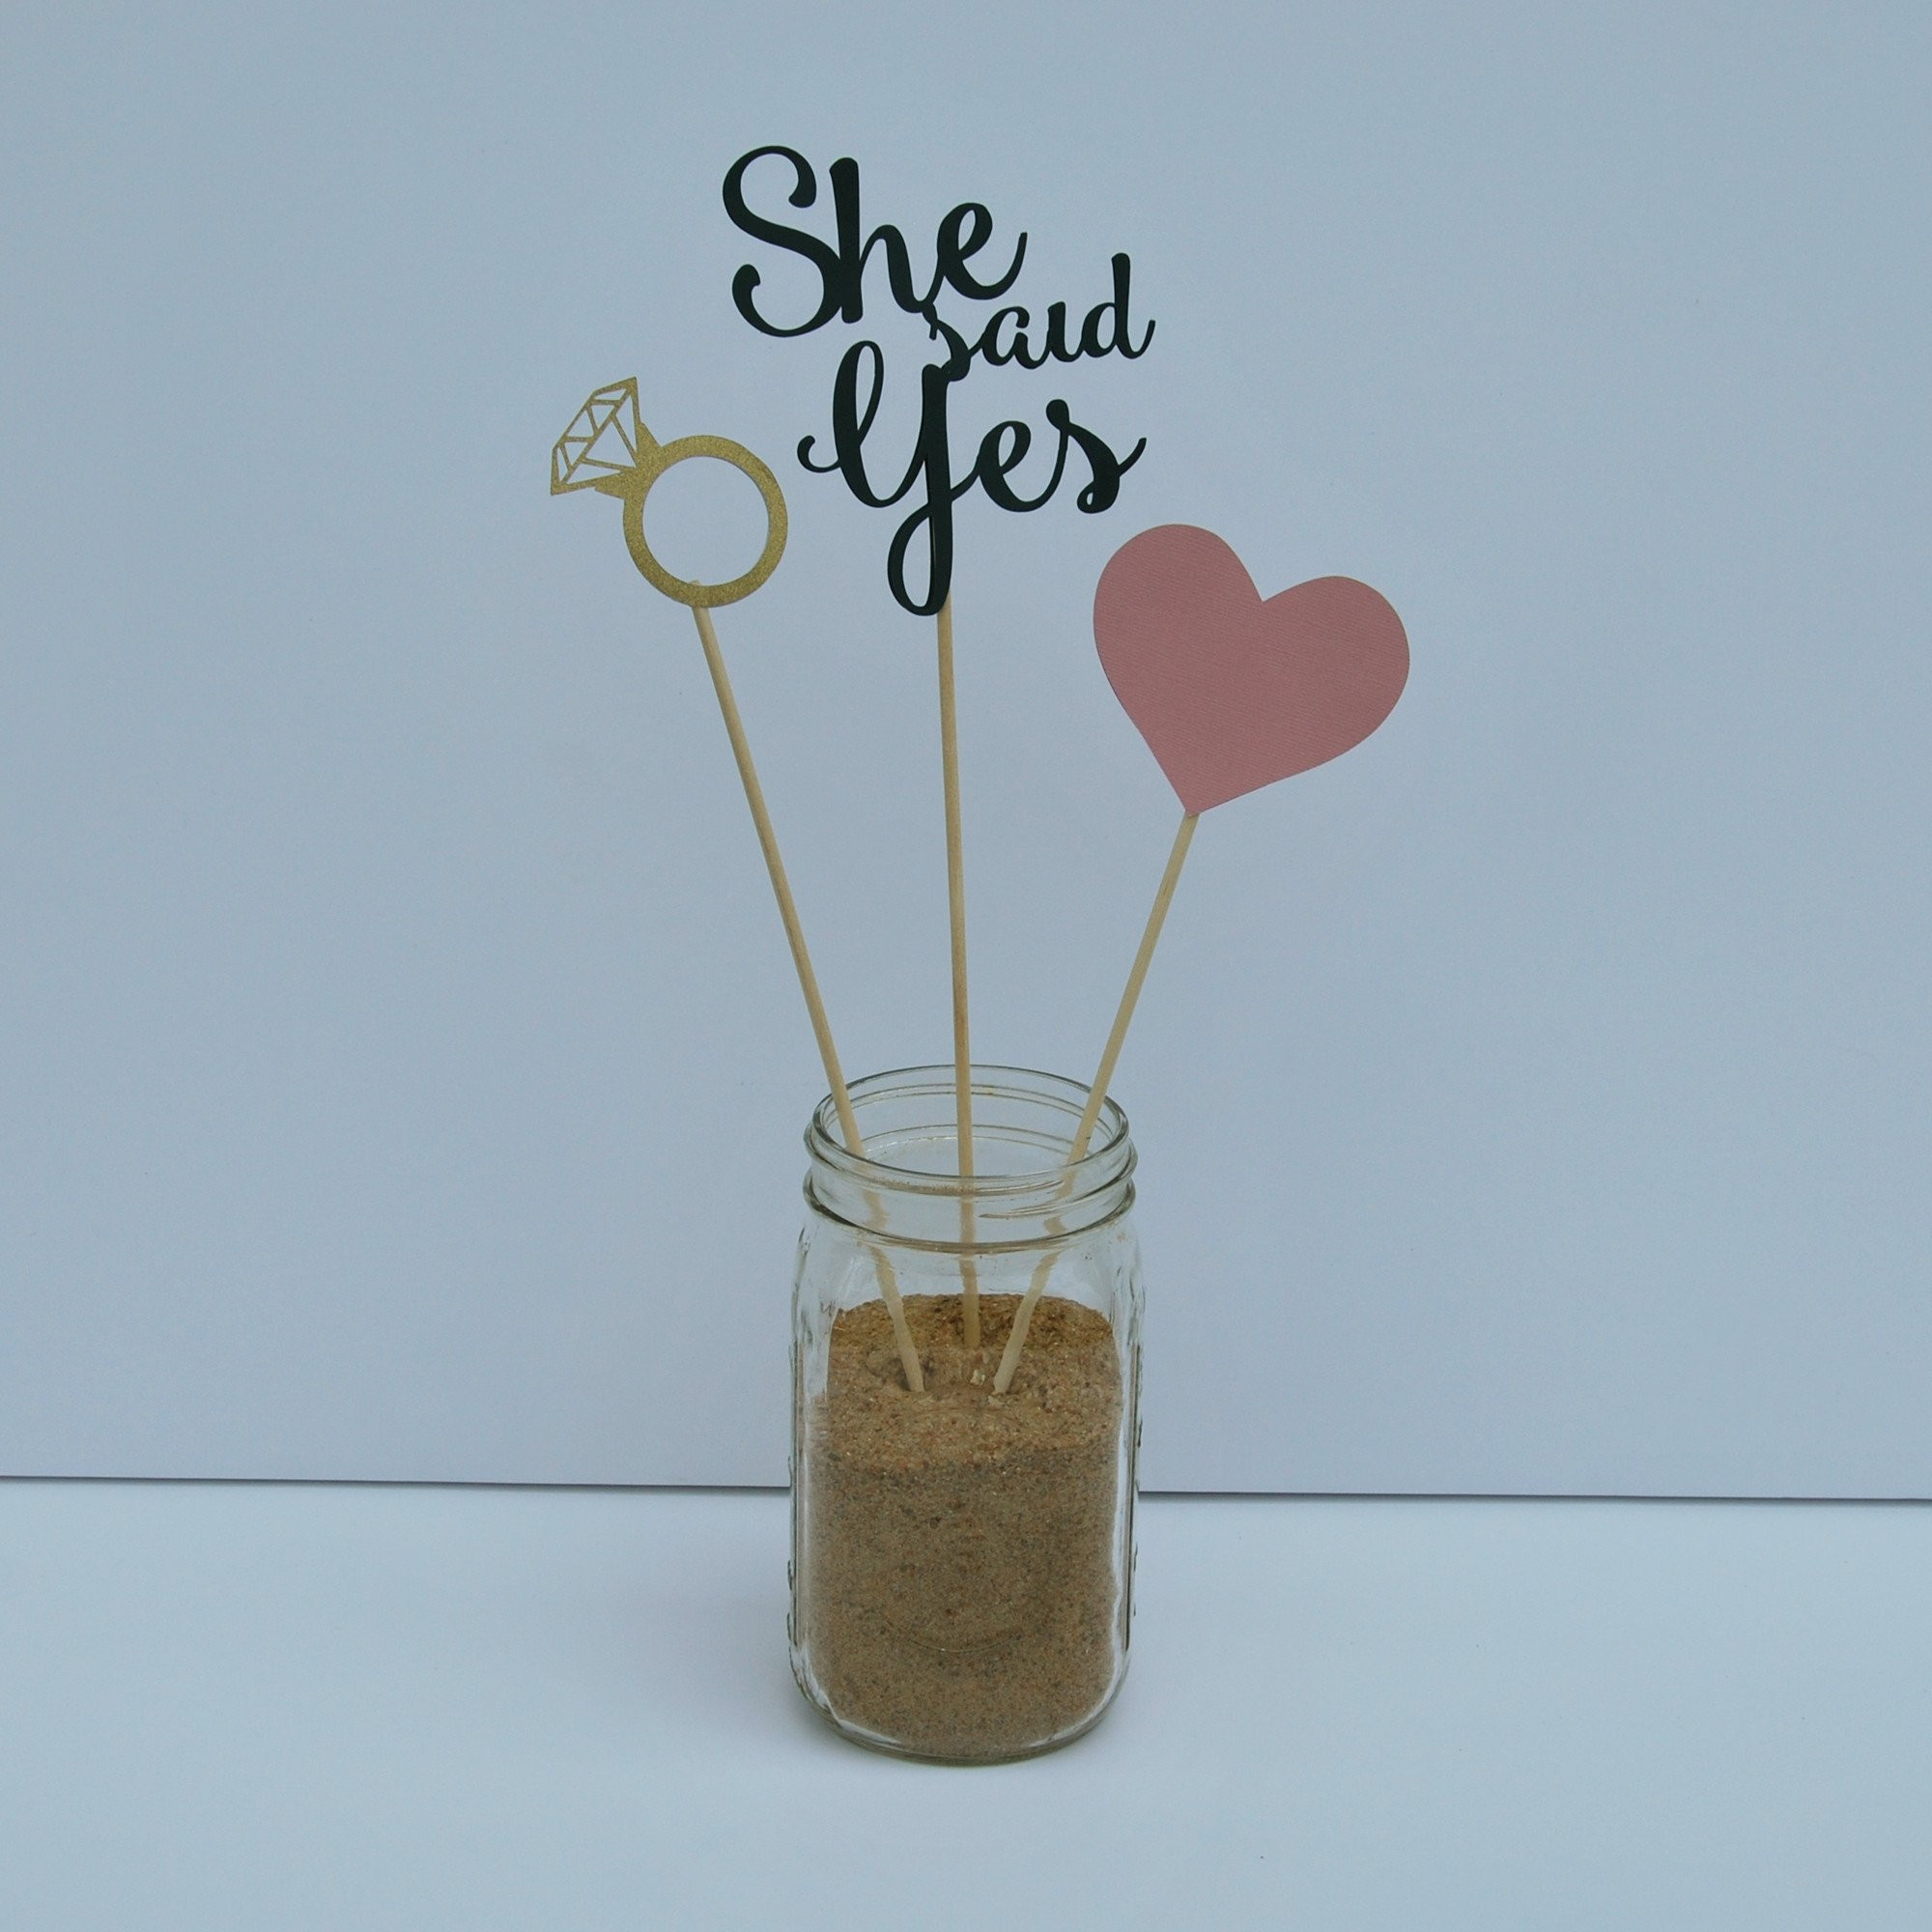 Pinterest Engagement Party Ideas
 "She Said Yes" Engagement Party Centerpiece for Pinterest